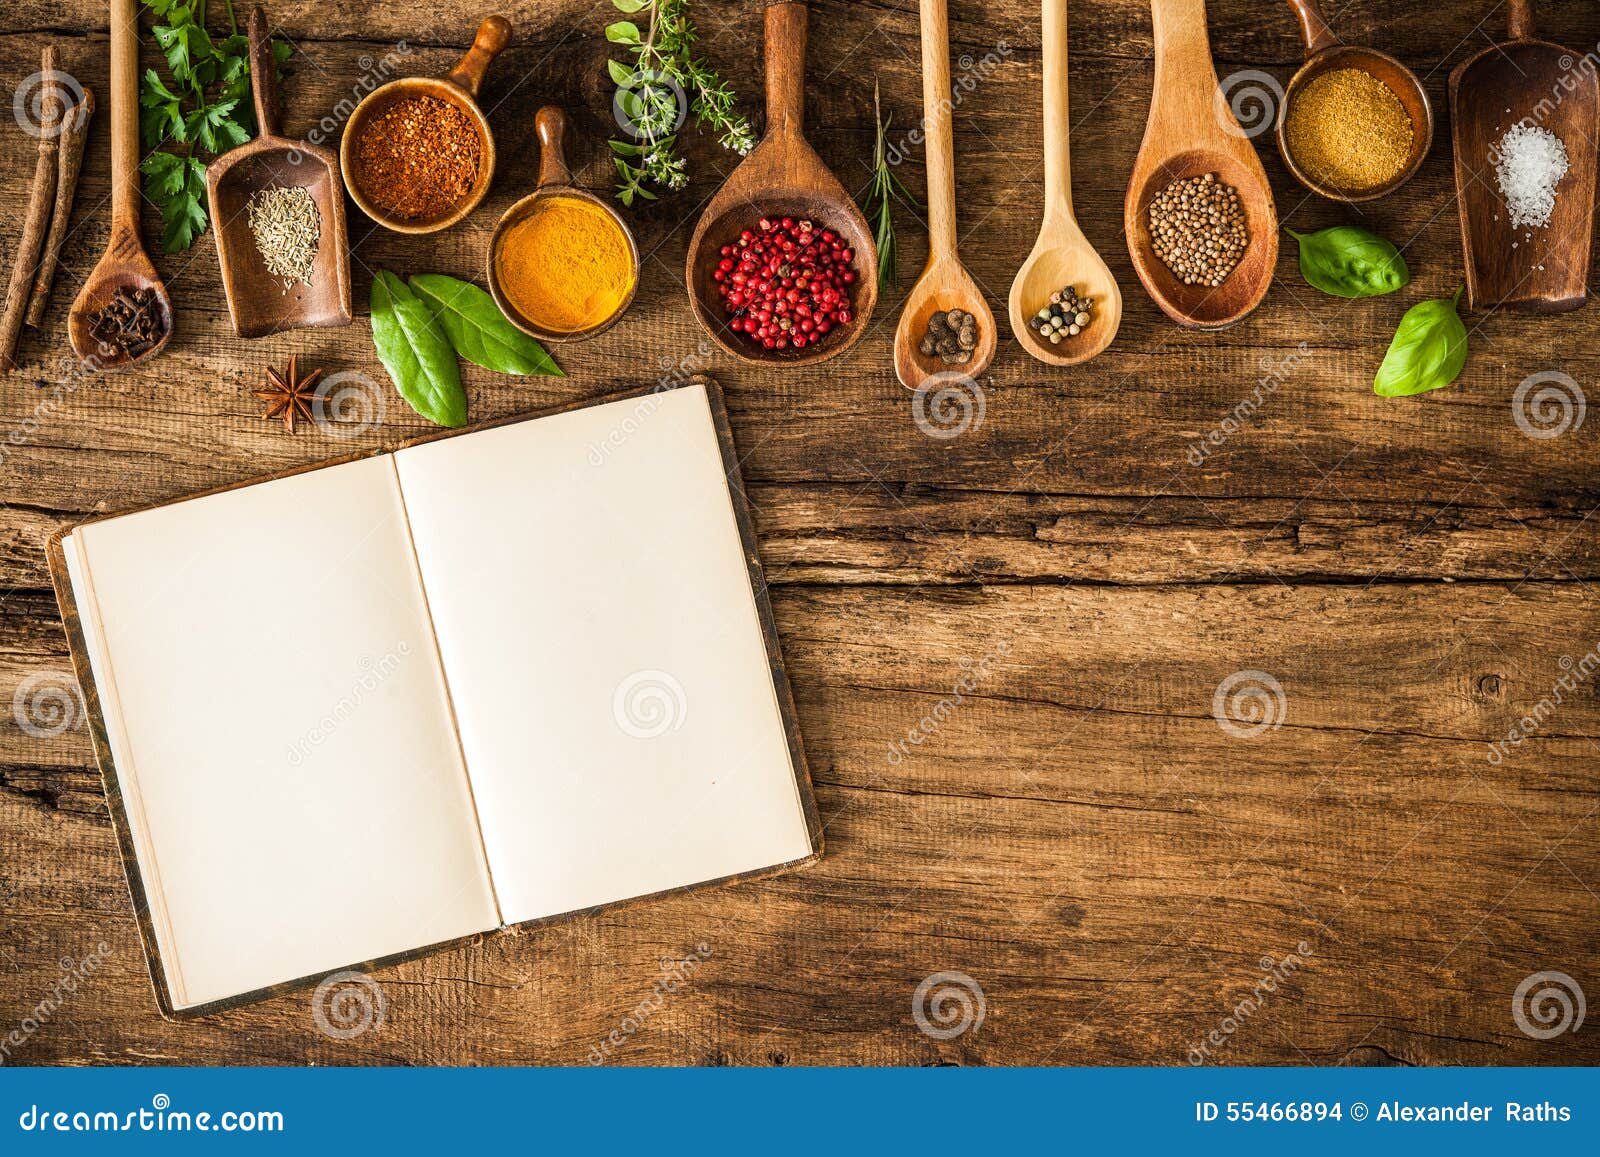 https://thumbs.dreamstime.com/z/blank-cookbook-spices-wooden-table-55466894.jpg